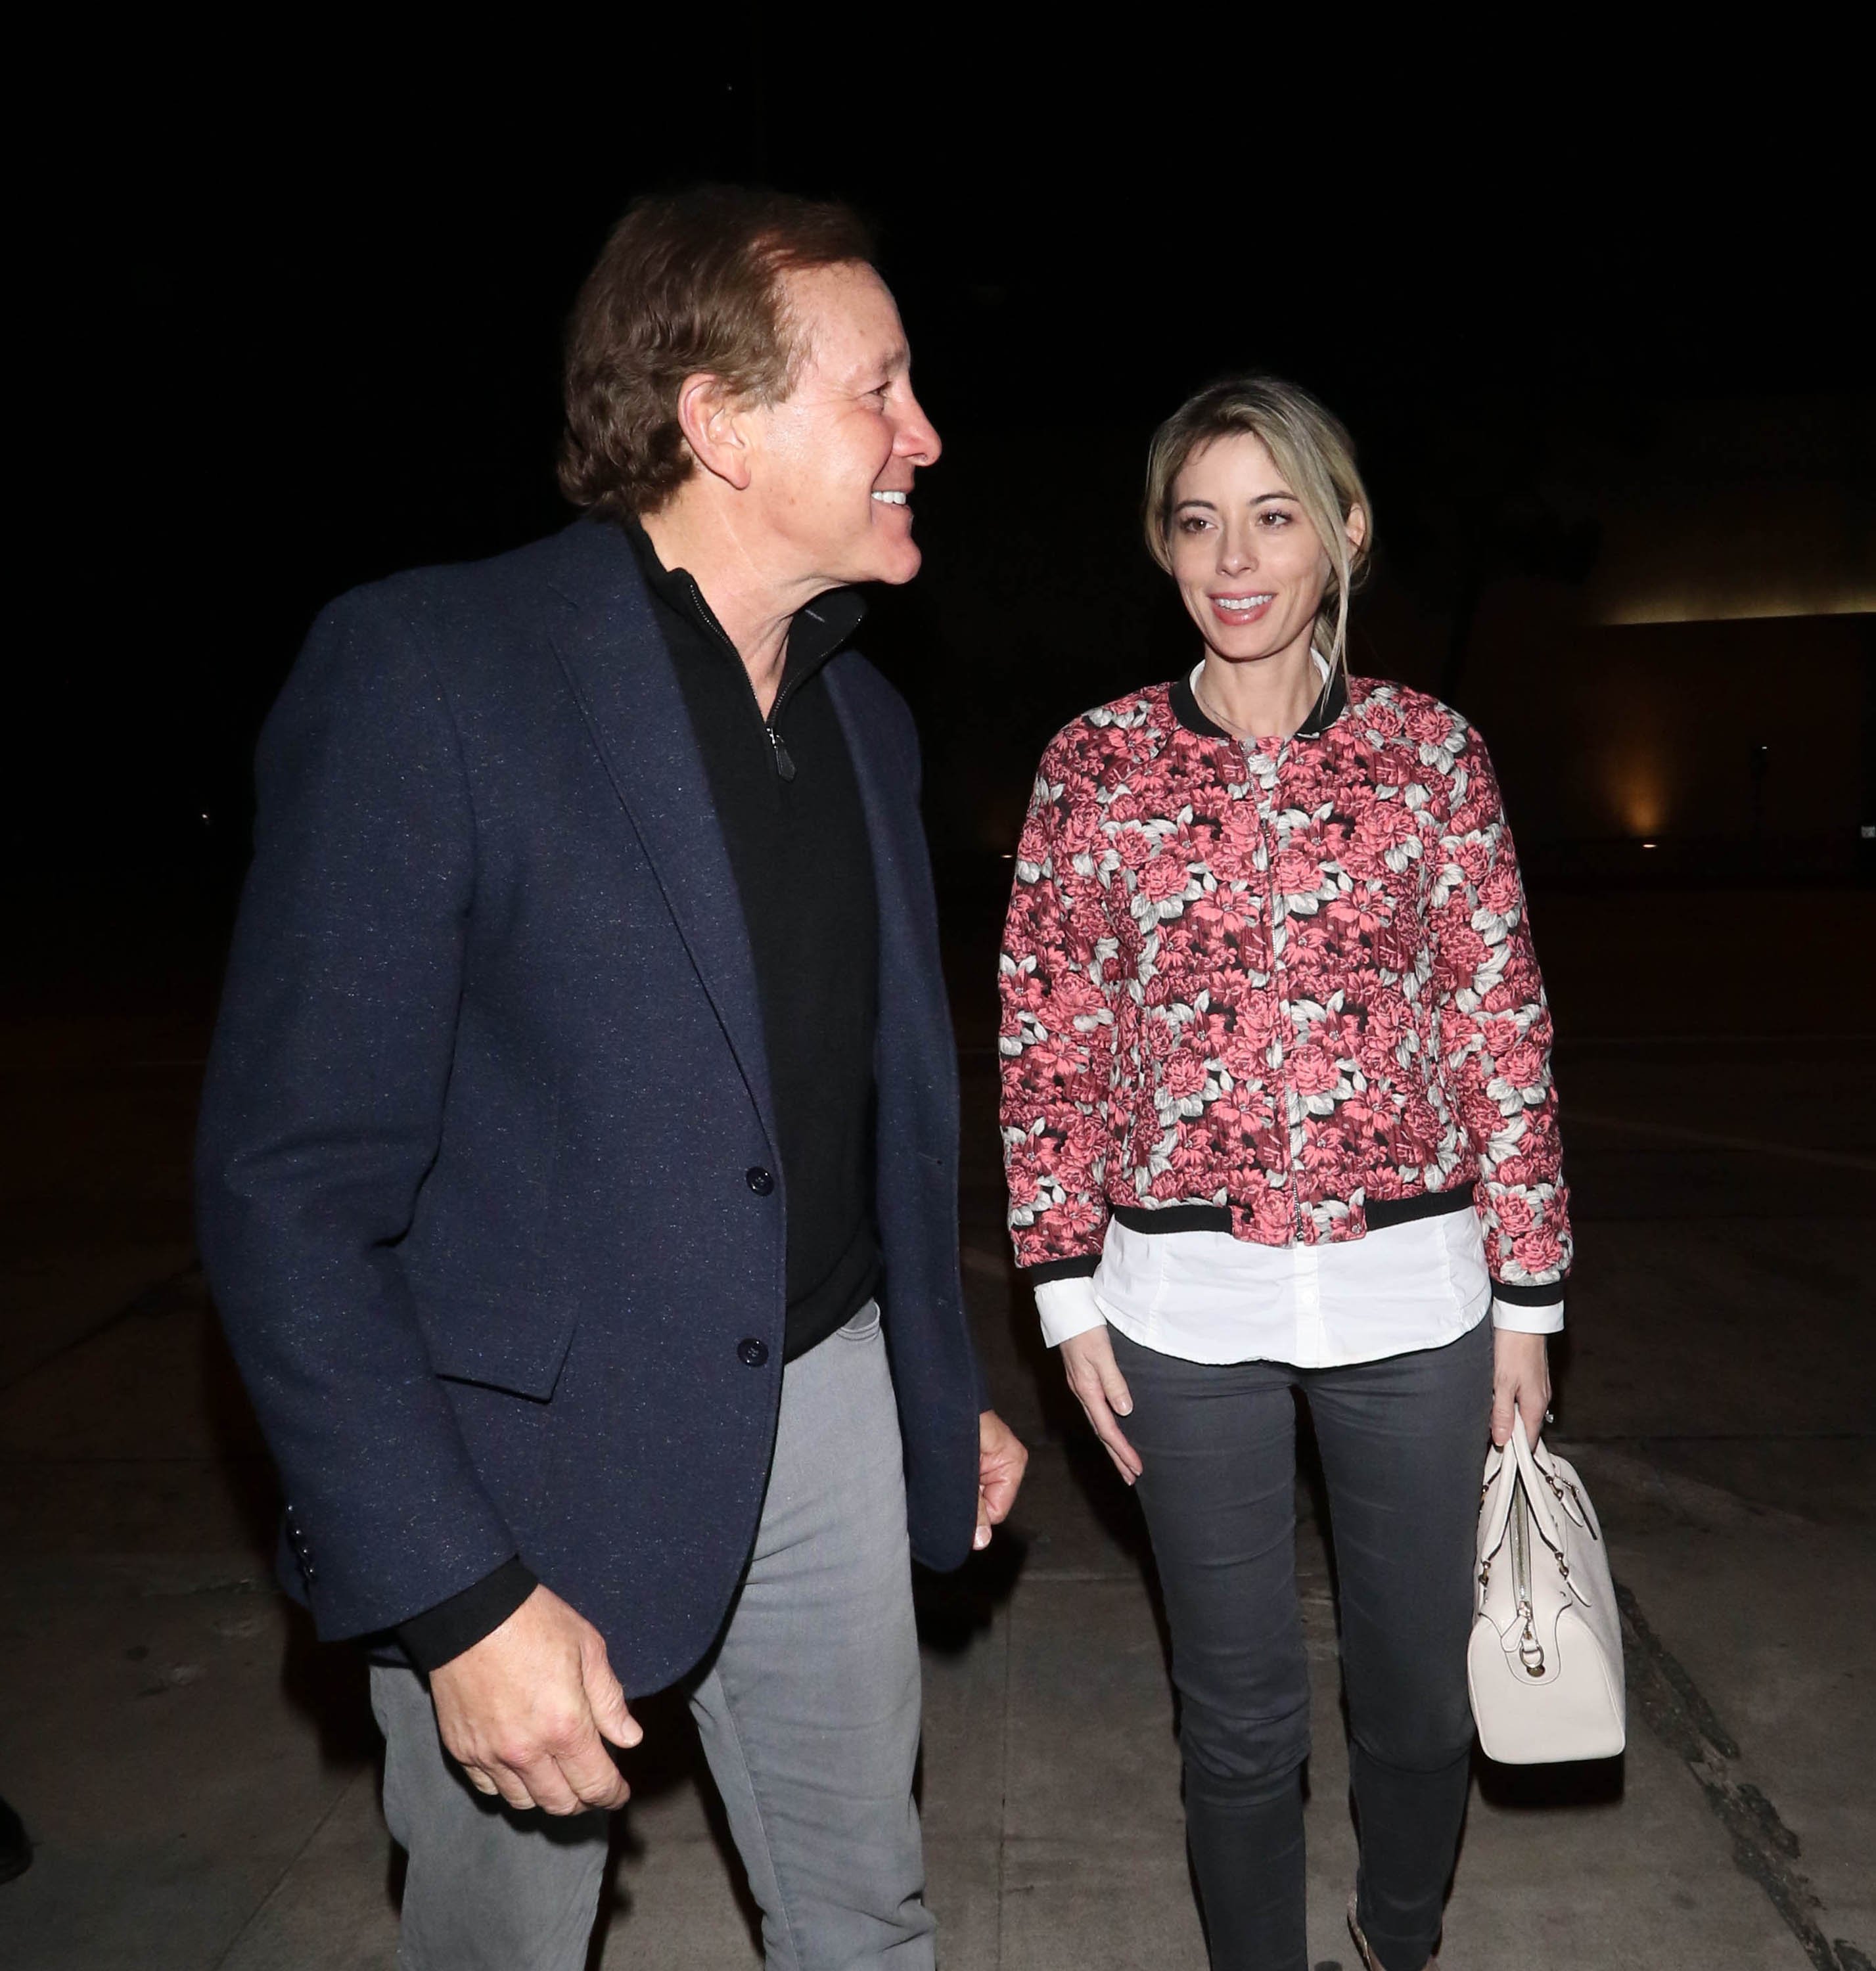 Steven Guttenberg and Emily Smith on February 18, 2019 in Los Angeles, CA. | Source: Getty Images